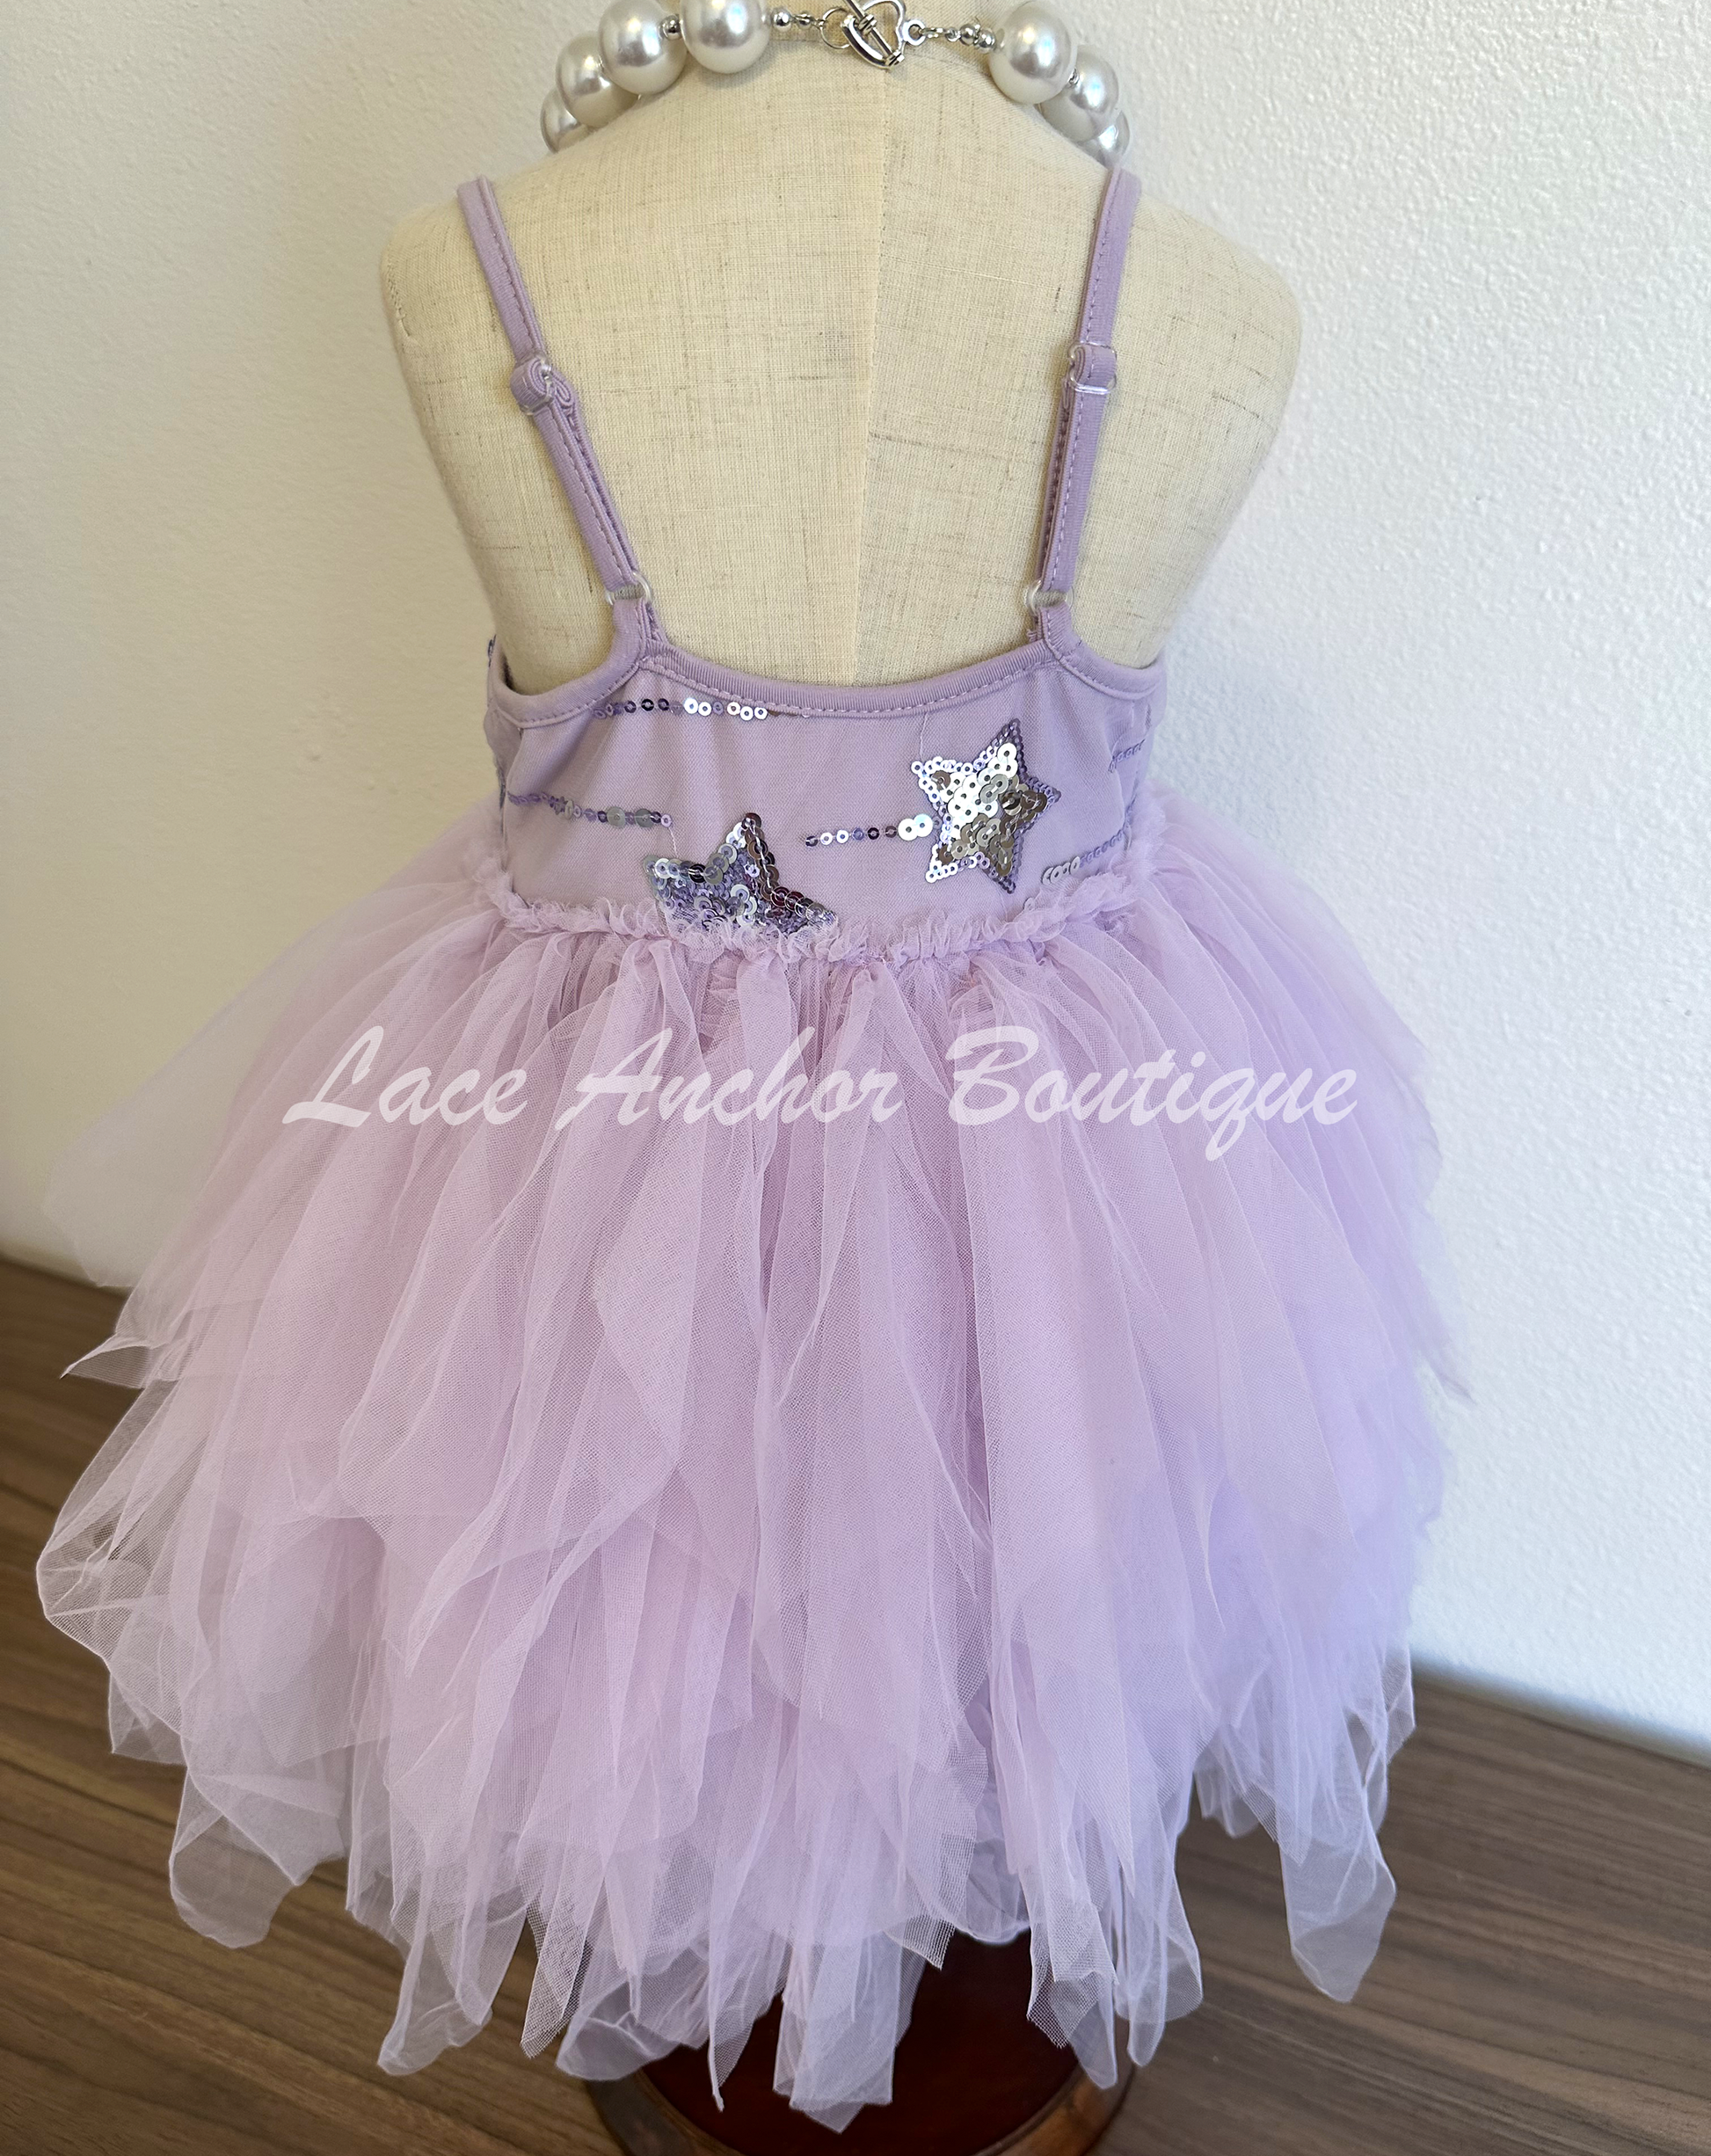 lilac purple toddler youth girls dress with silver sequin stars on top, thin straps, and messy fringed layered tulle skirt. Girl princes dress.